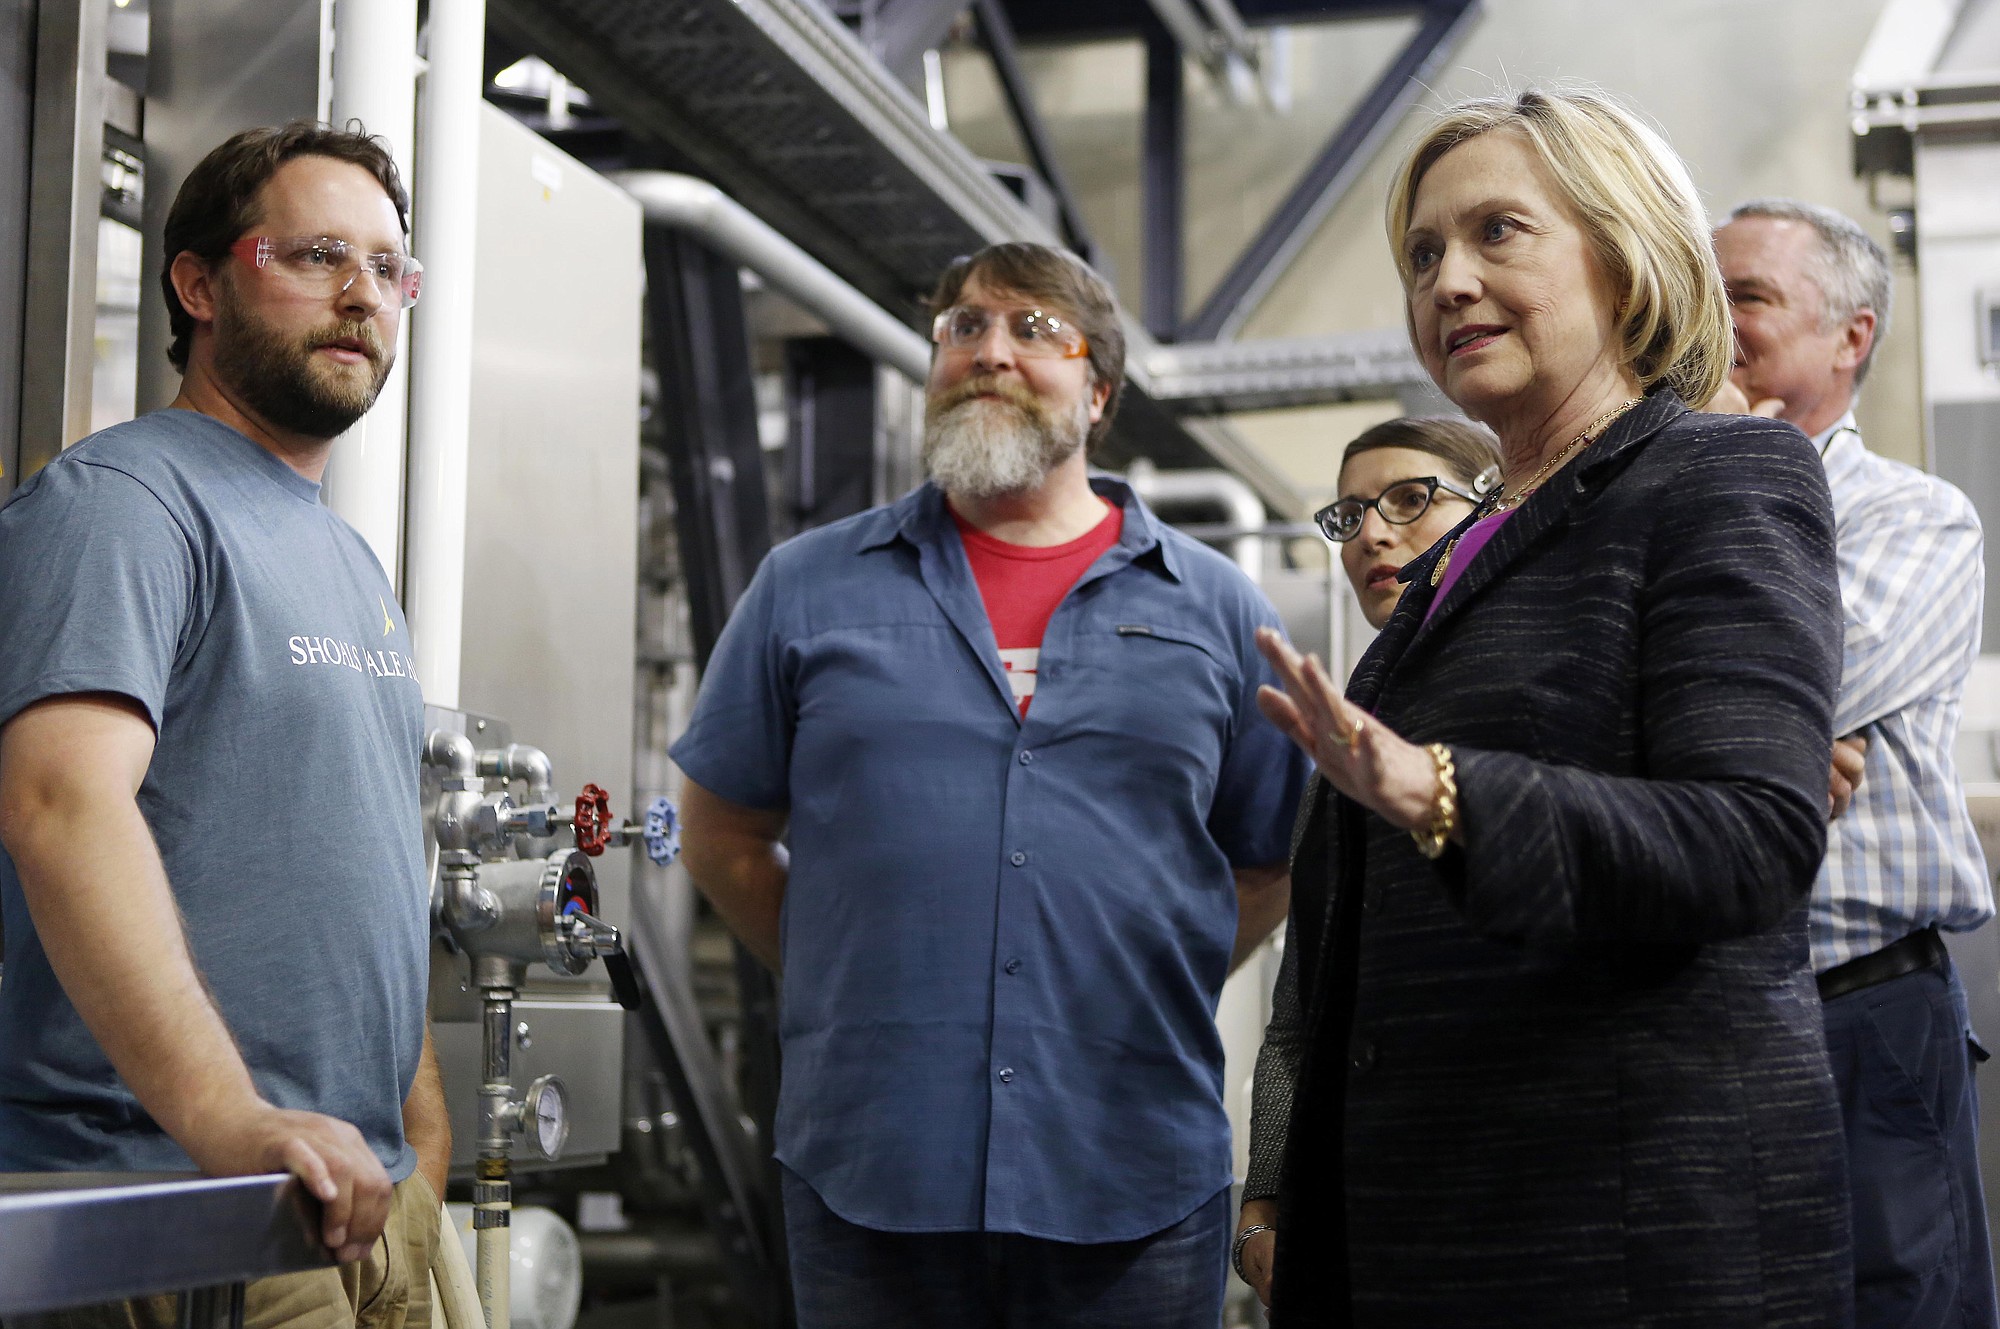 Democratic presidential candidate Hillary Rodham Clinton speaks with employees Friday during a tour of the Smuttynose Brewery in Hampton, N.H.